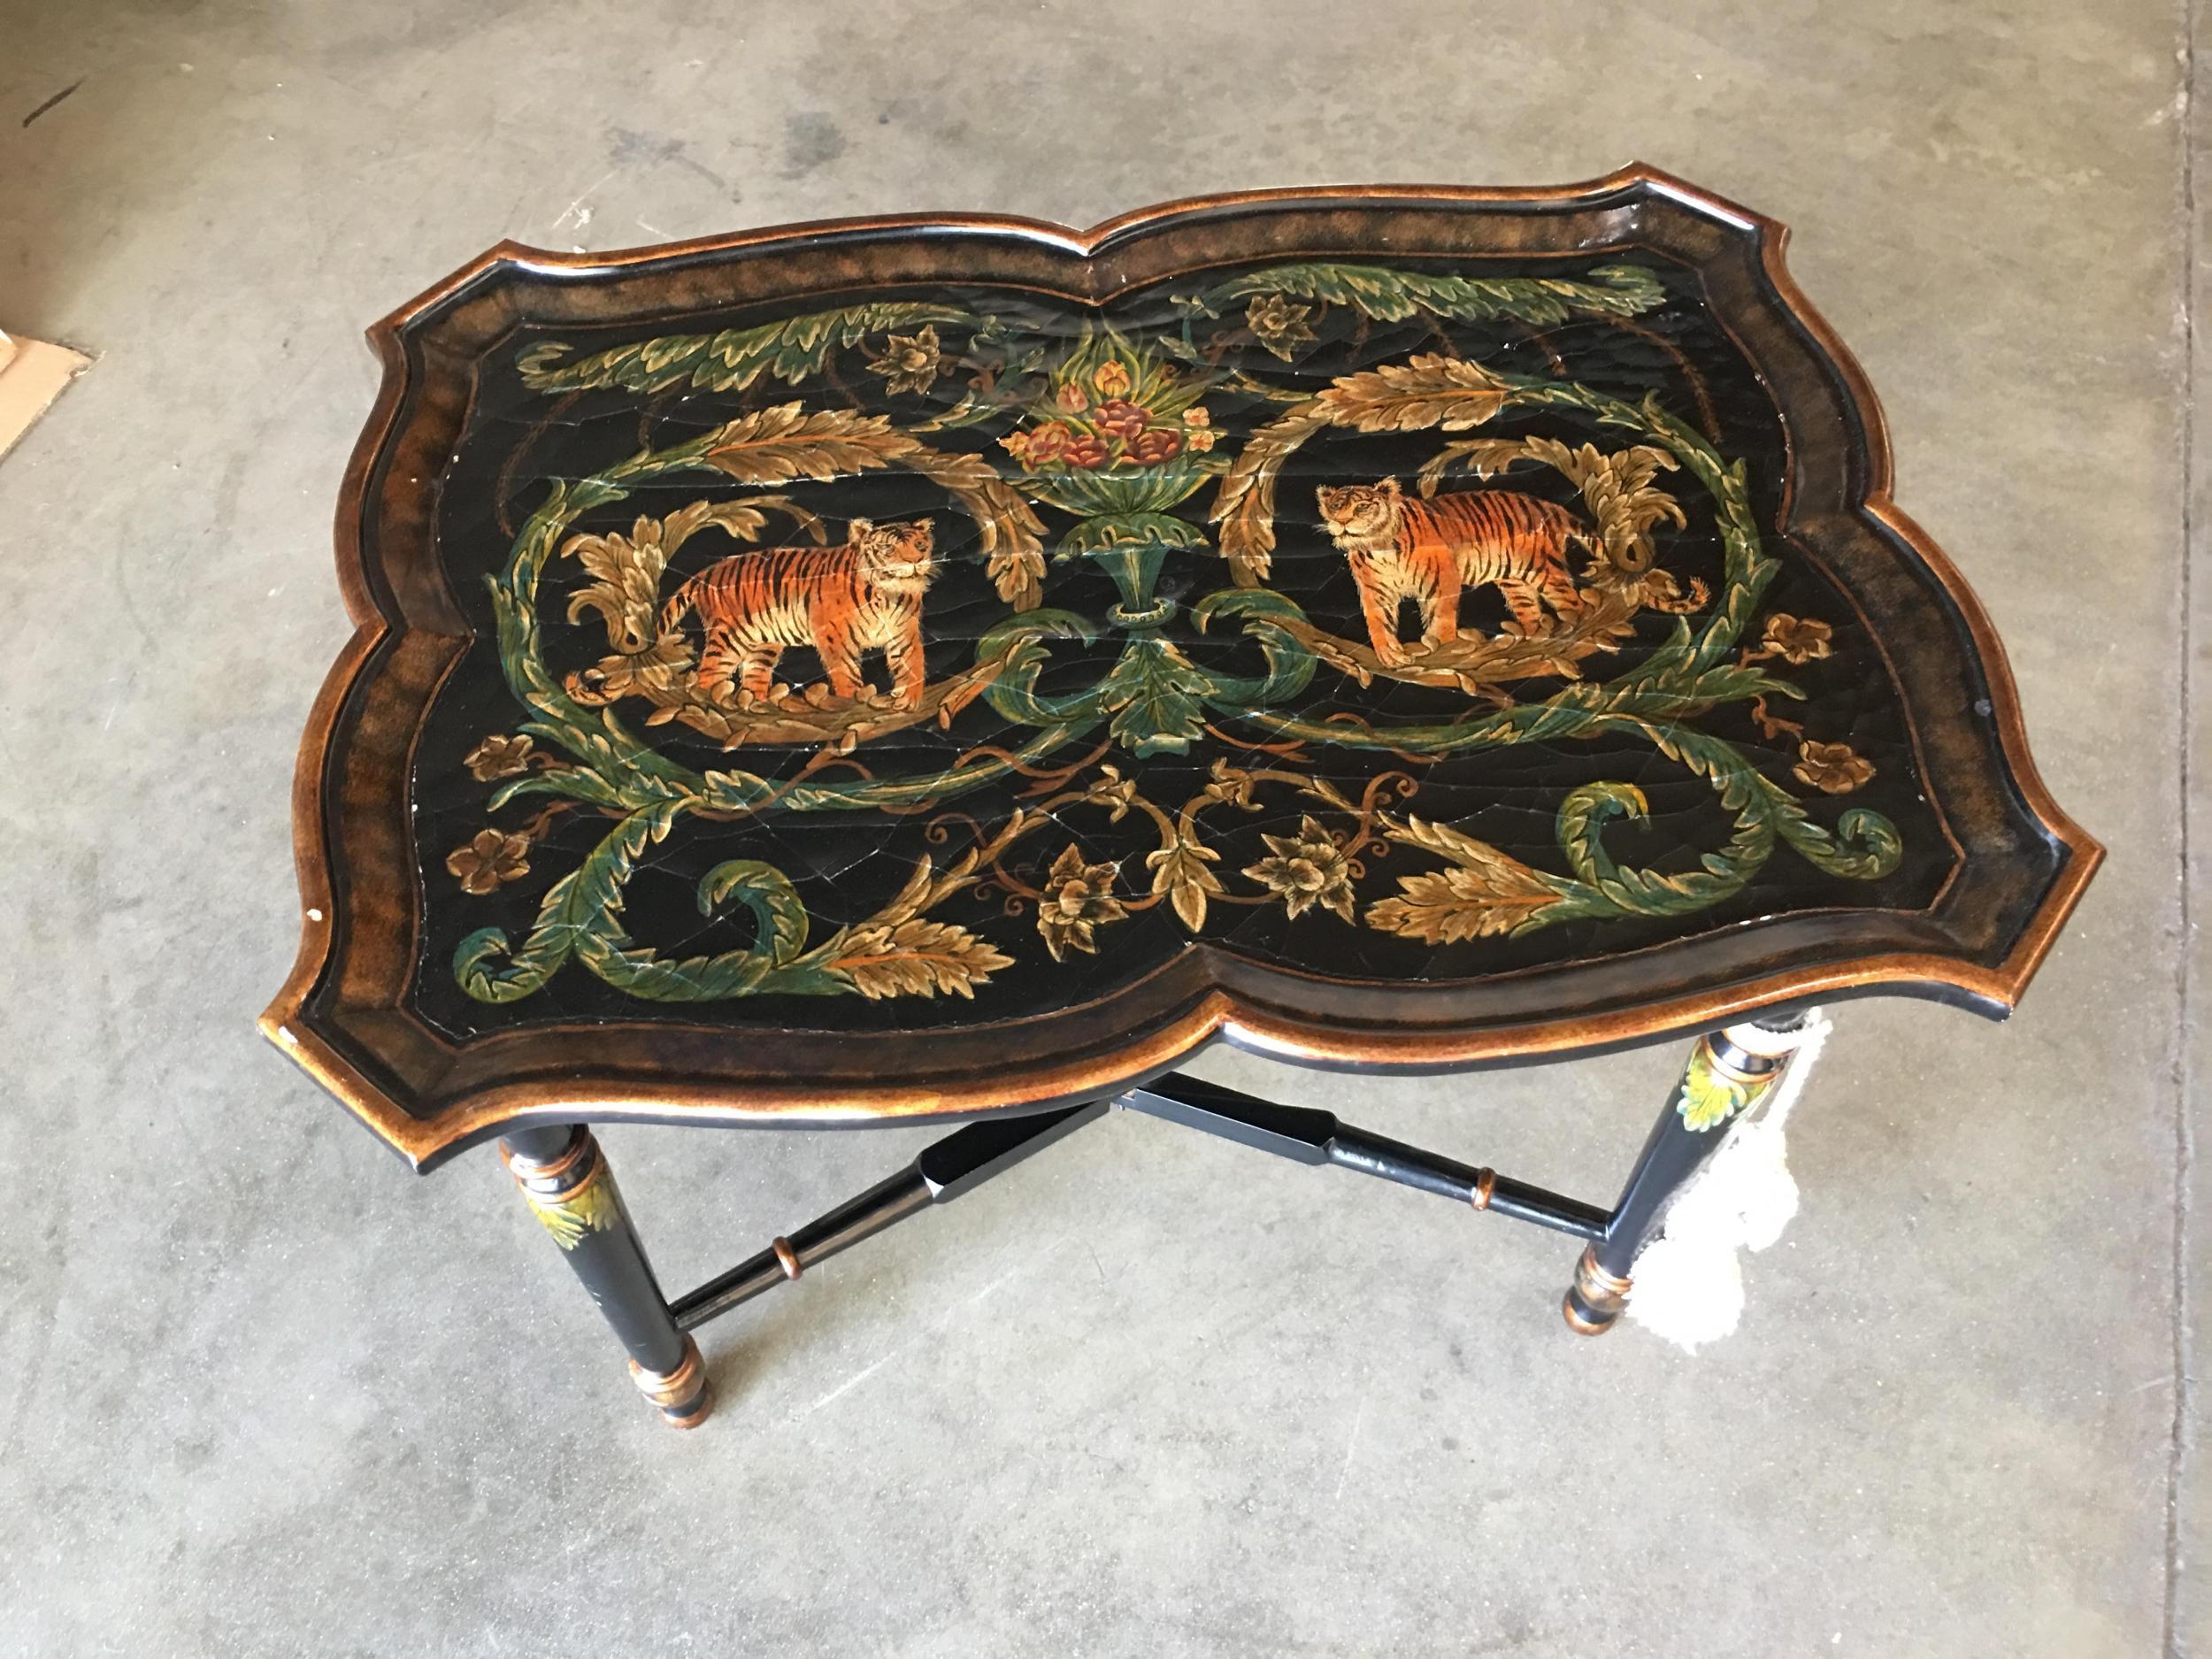 American Black Carved Wood Tray Table and Stand with Tiger Motif